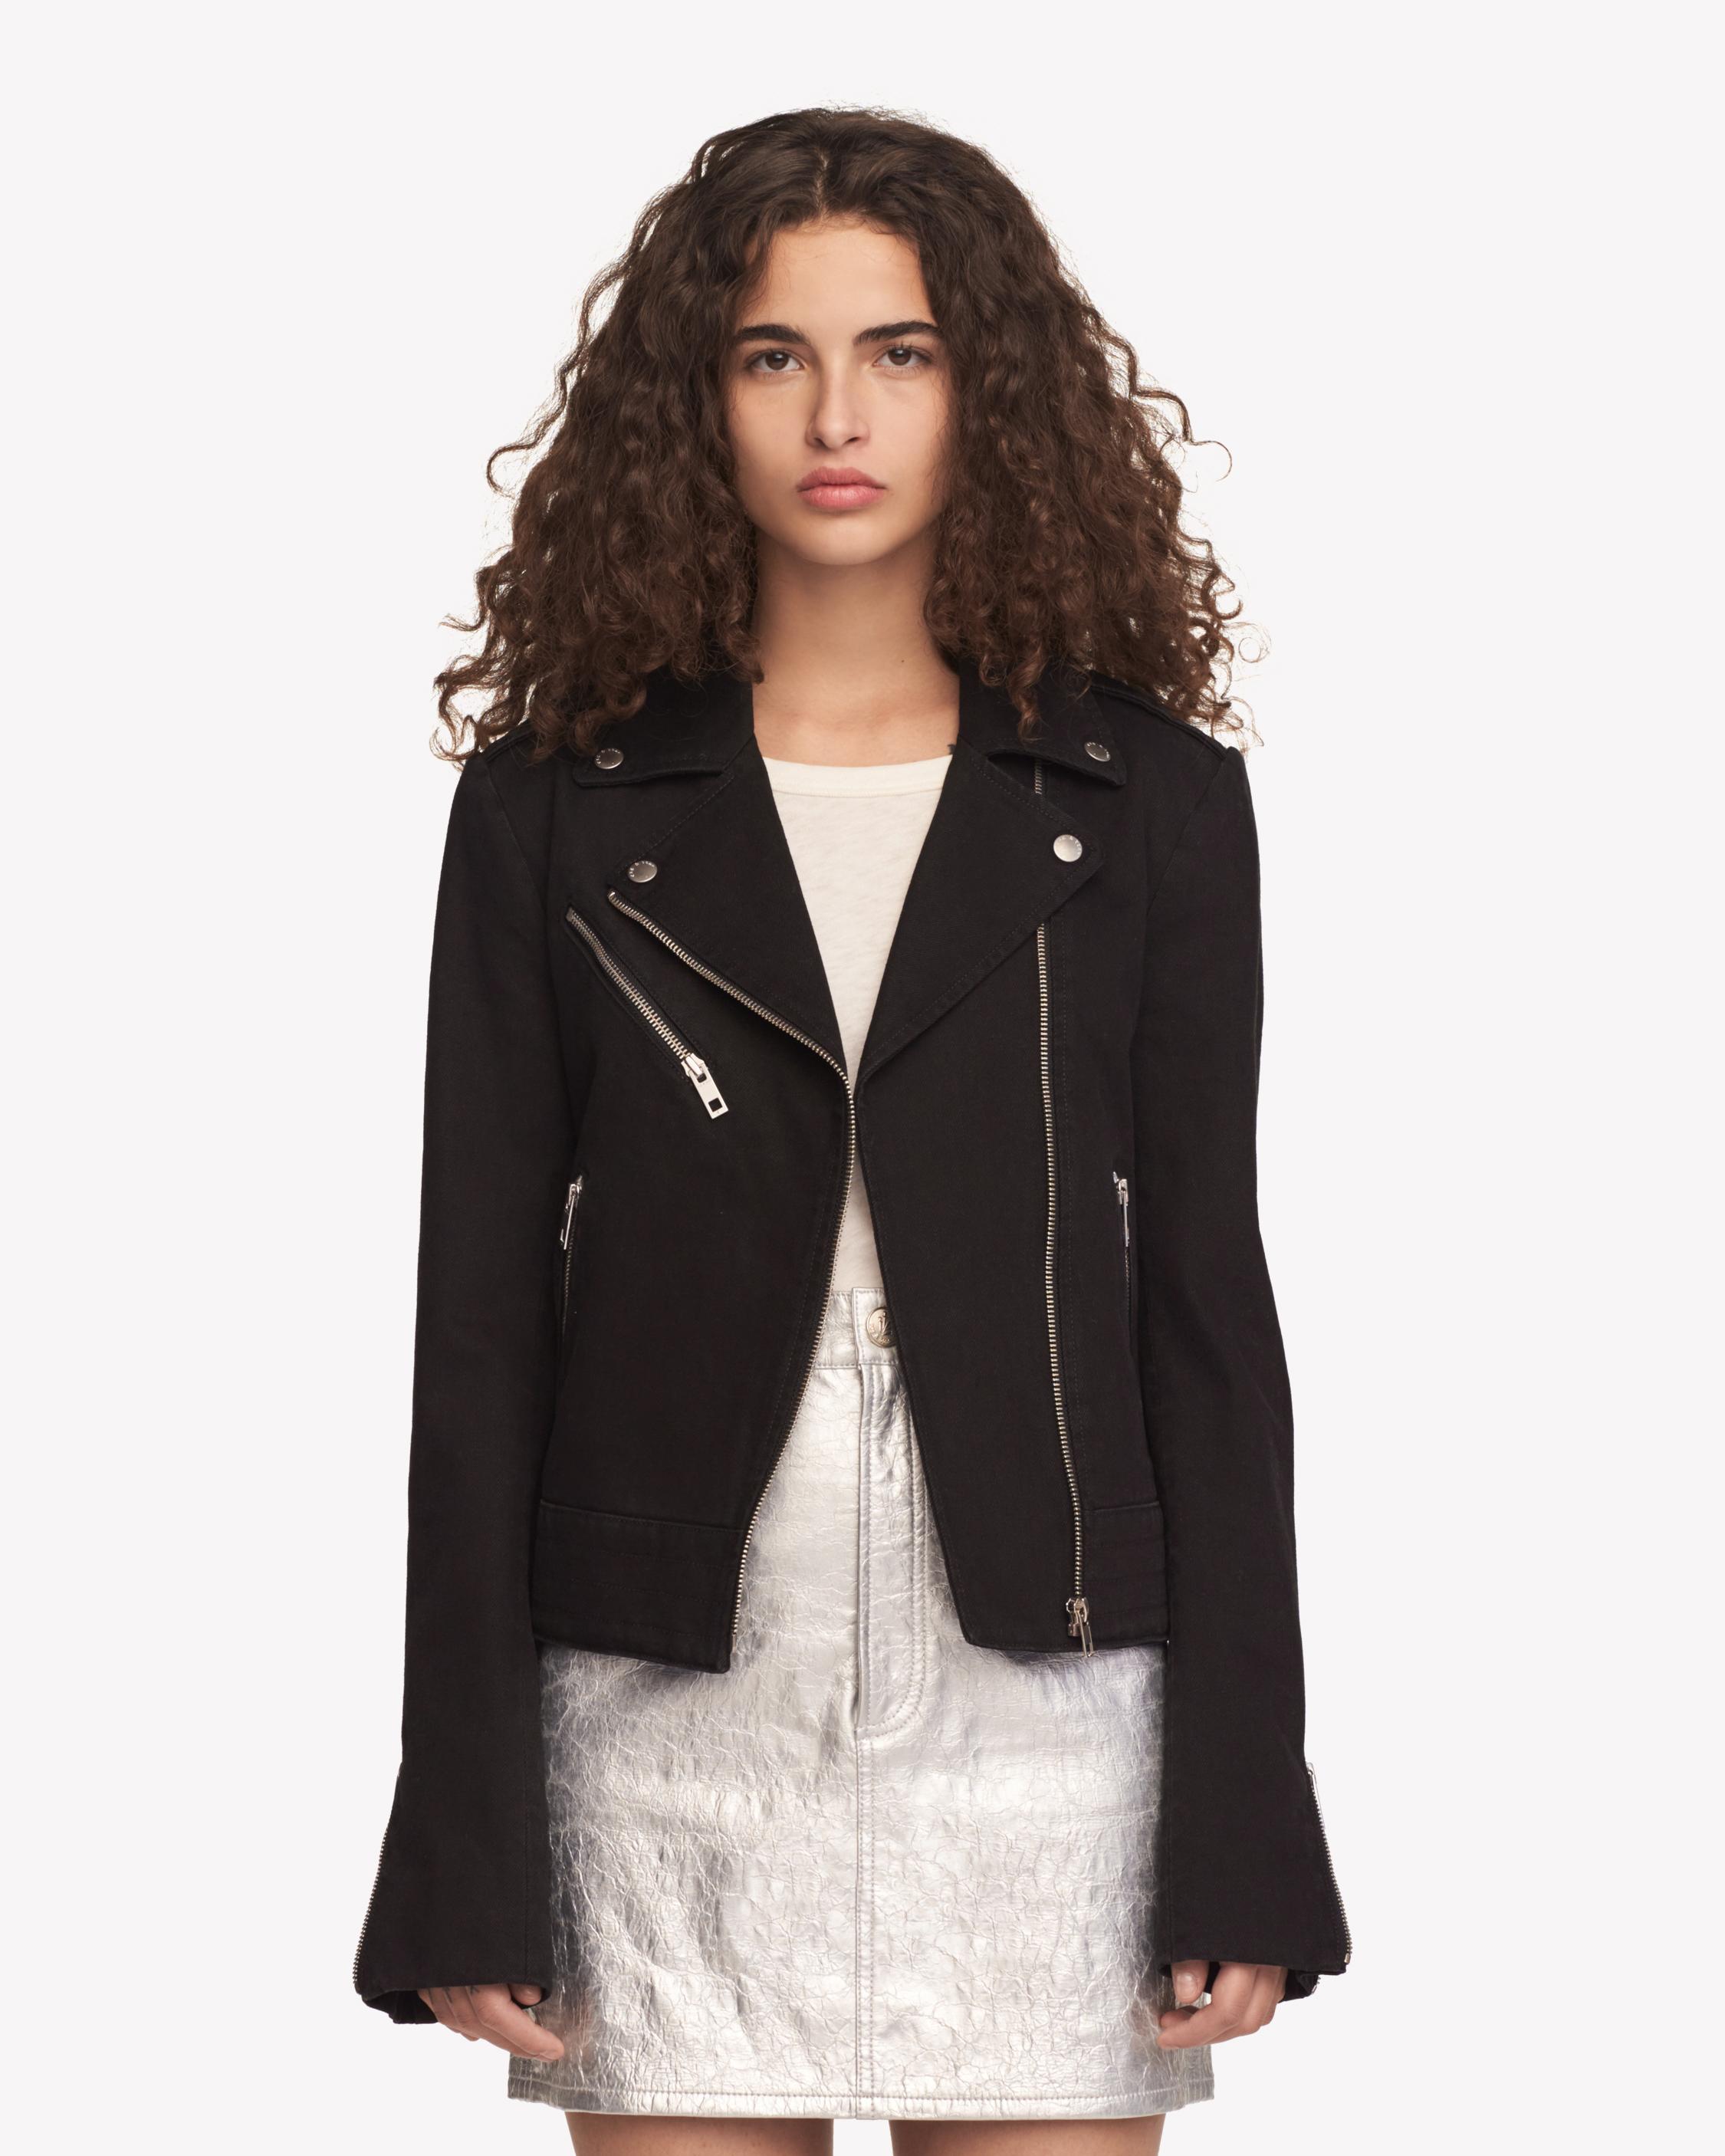 Coats, Jackets & Blazers: Leather Jackets to Jean, Bomber to Parka with ...